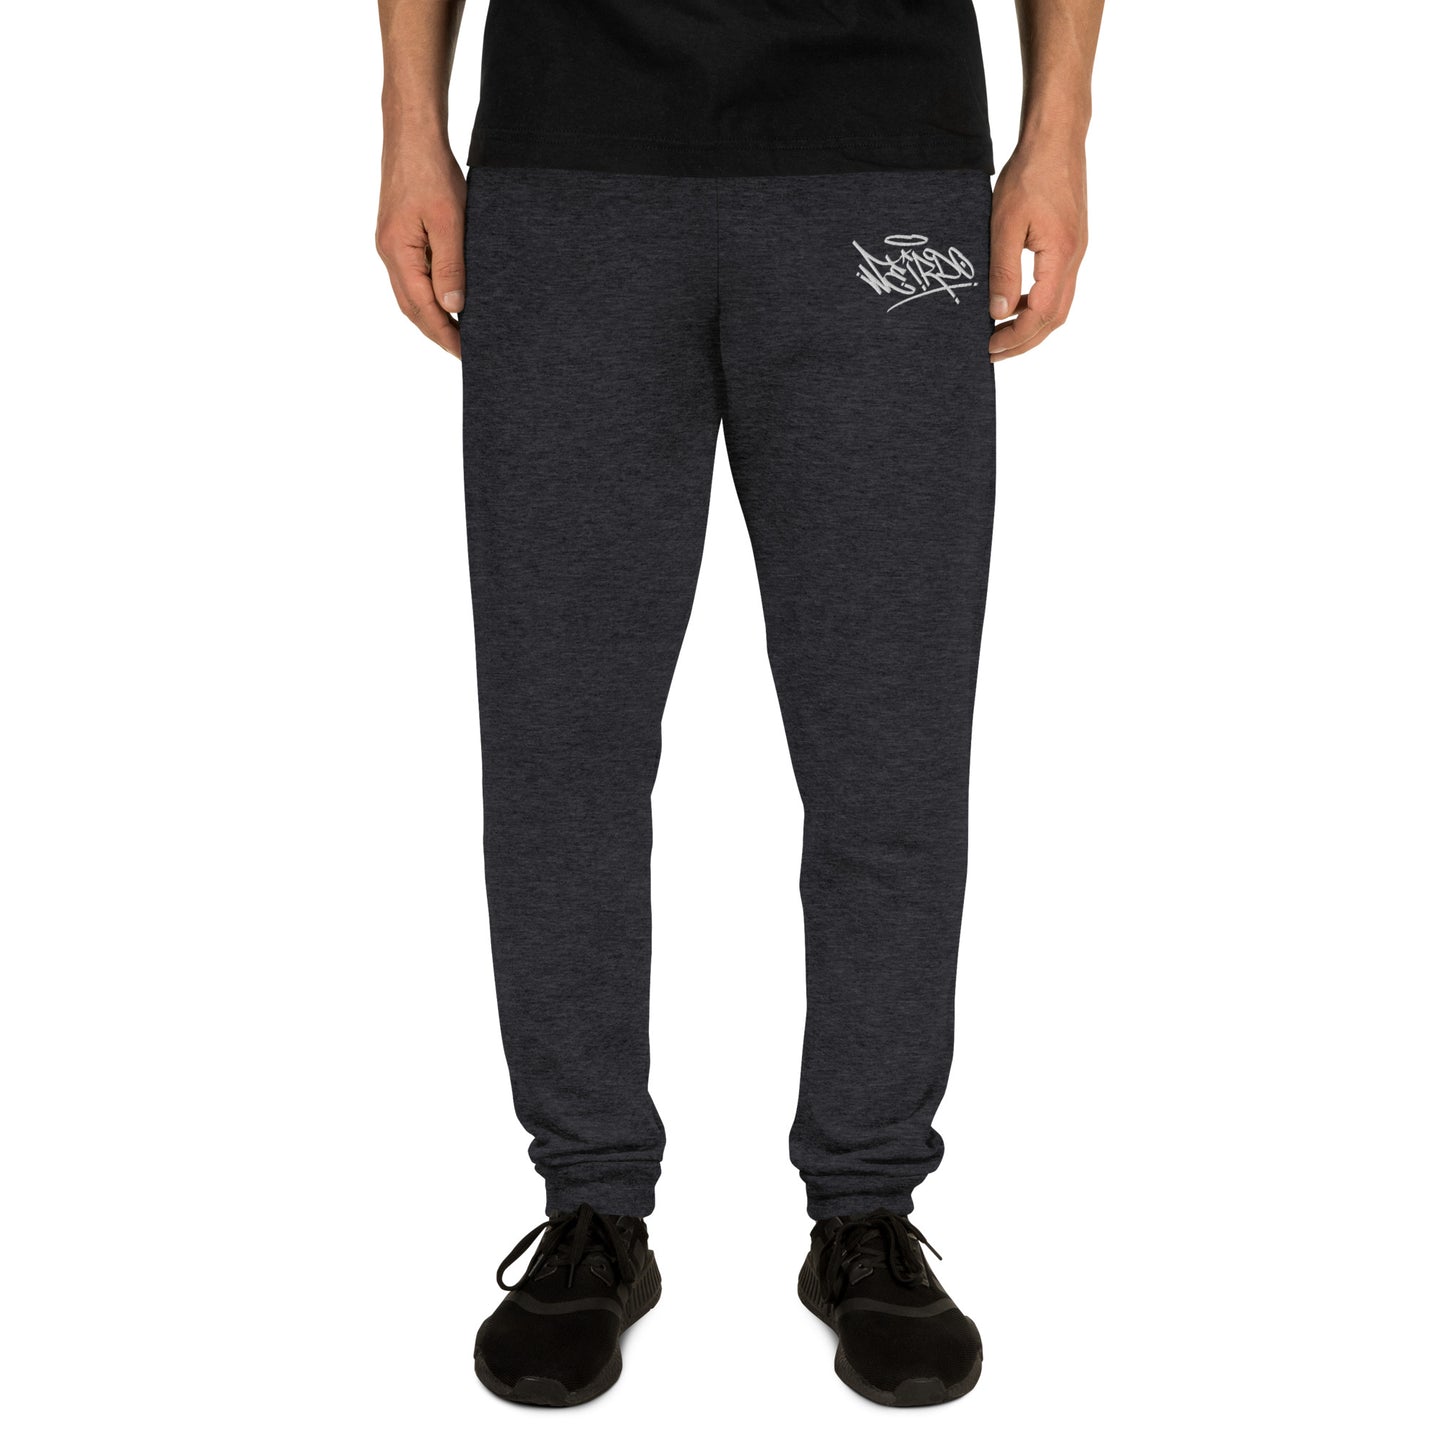 man wearing Weirdo Tag joggers Dark Gray by B.Different Clothing street art graffiti inspired brand for weirdos, outsiders, and misfits.